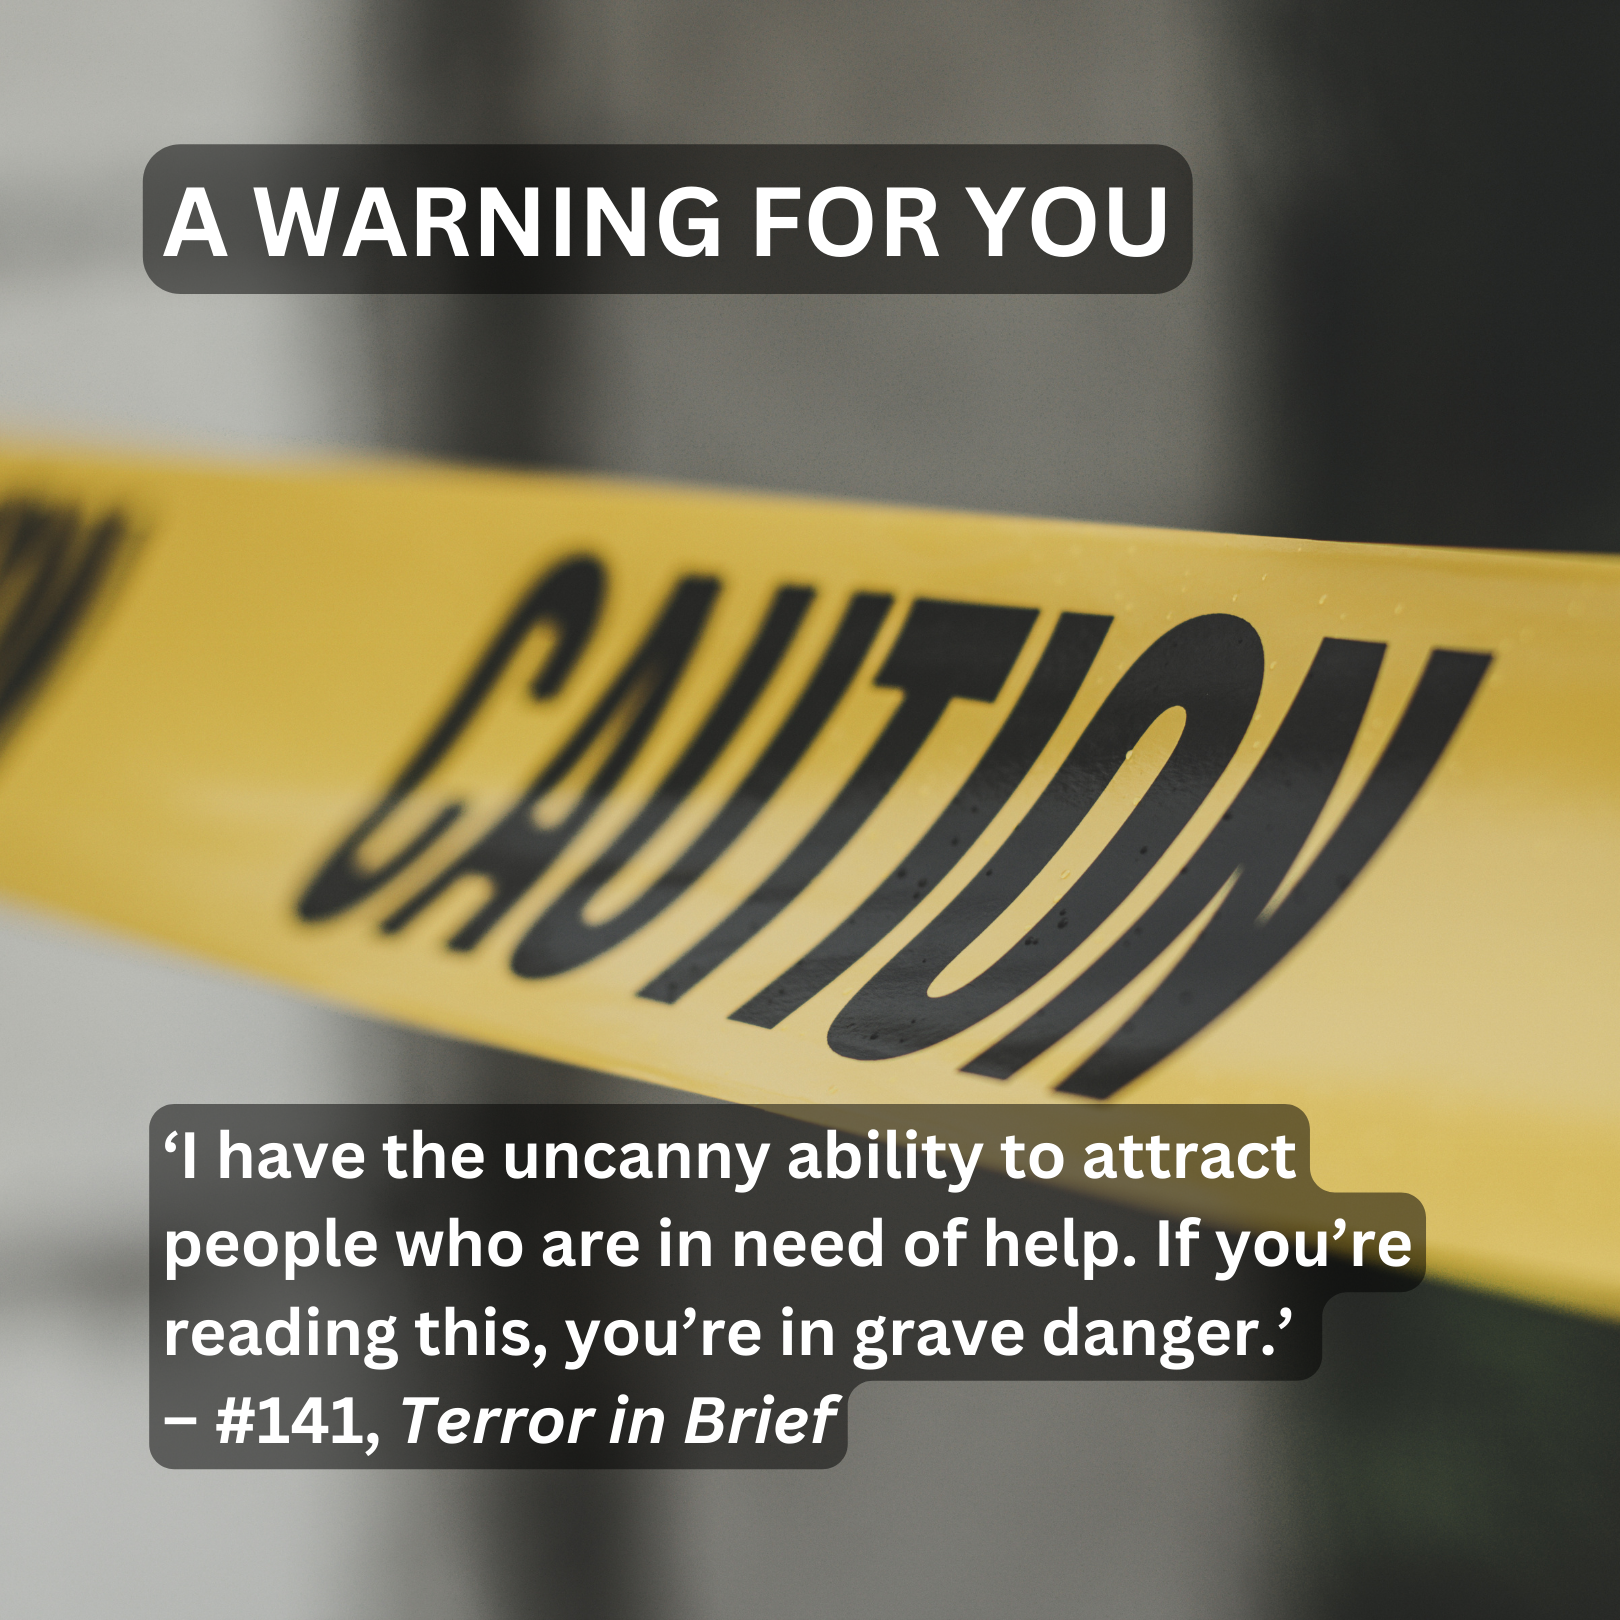 A Warning for You from Terror in Brief